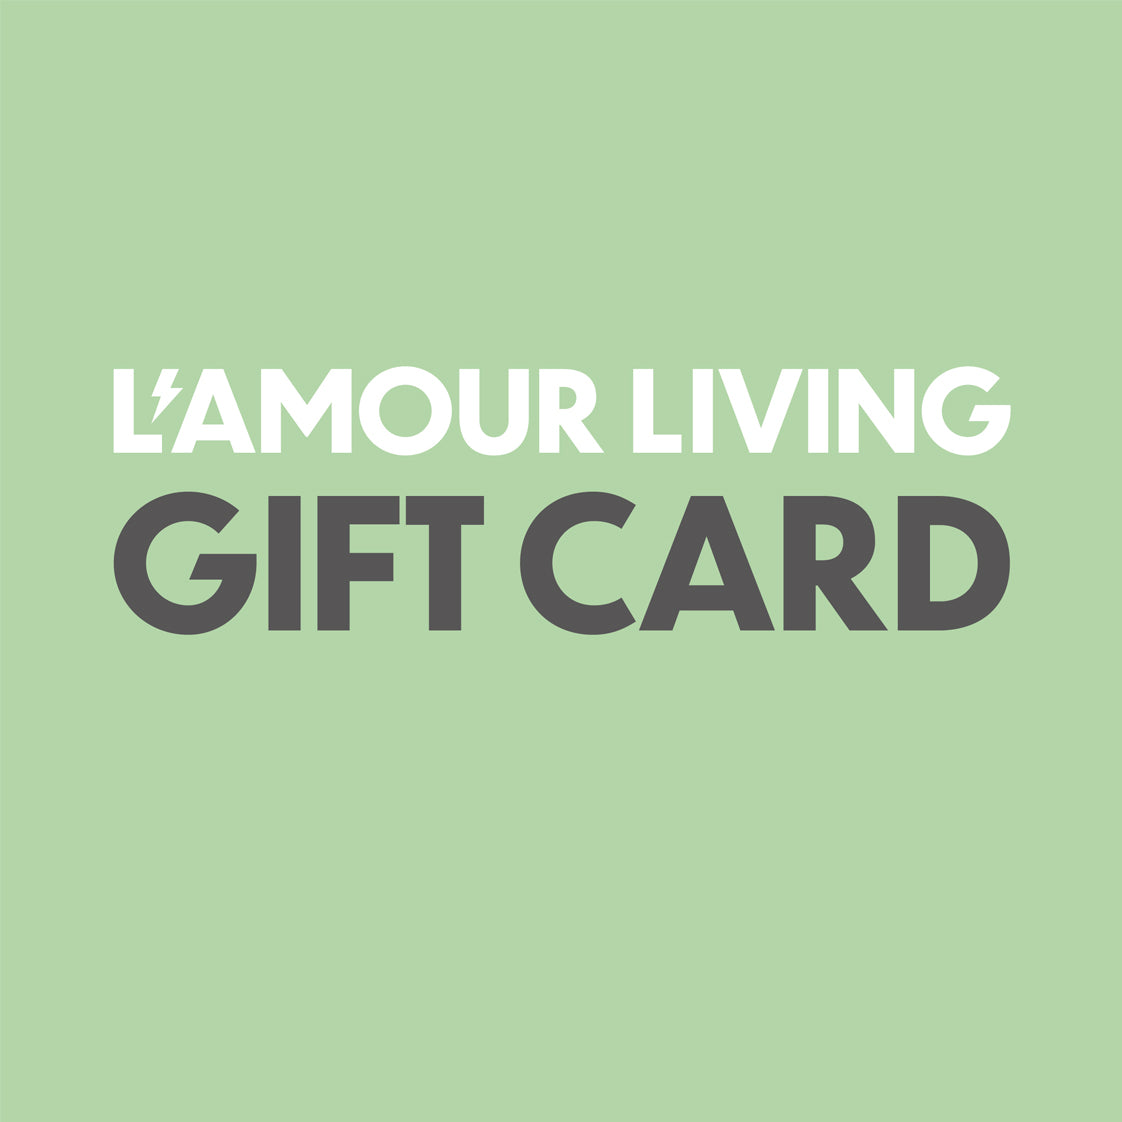 L'AMOUR LIVING GIFT CARD